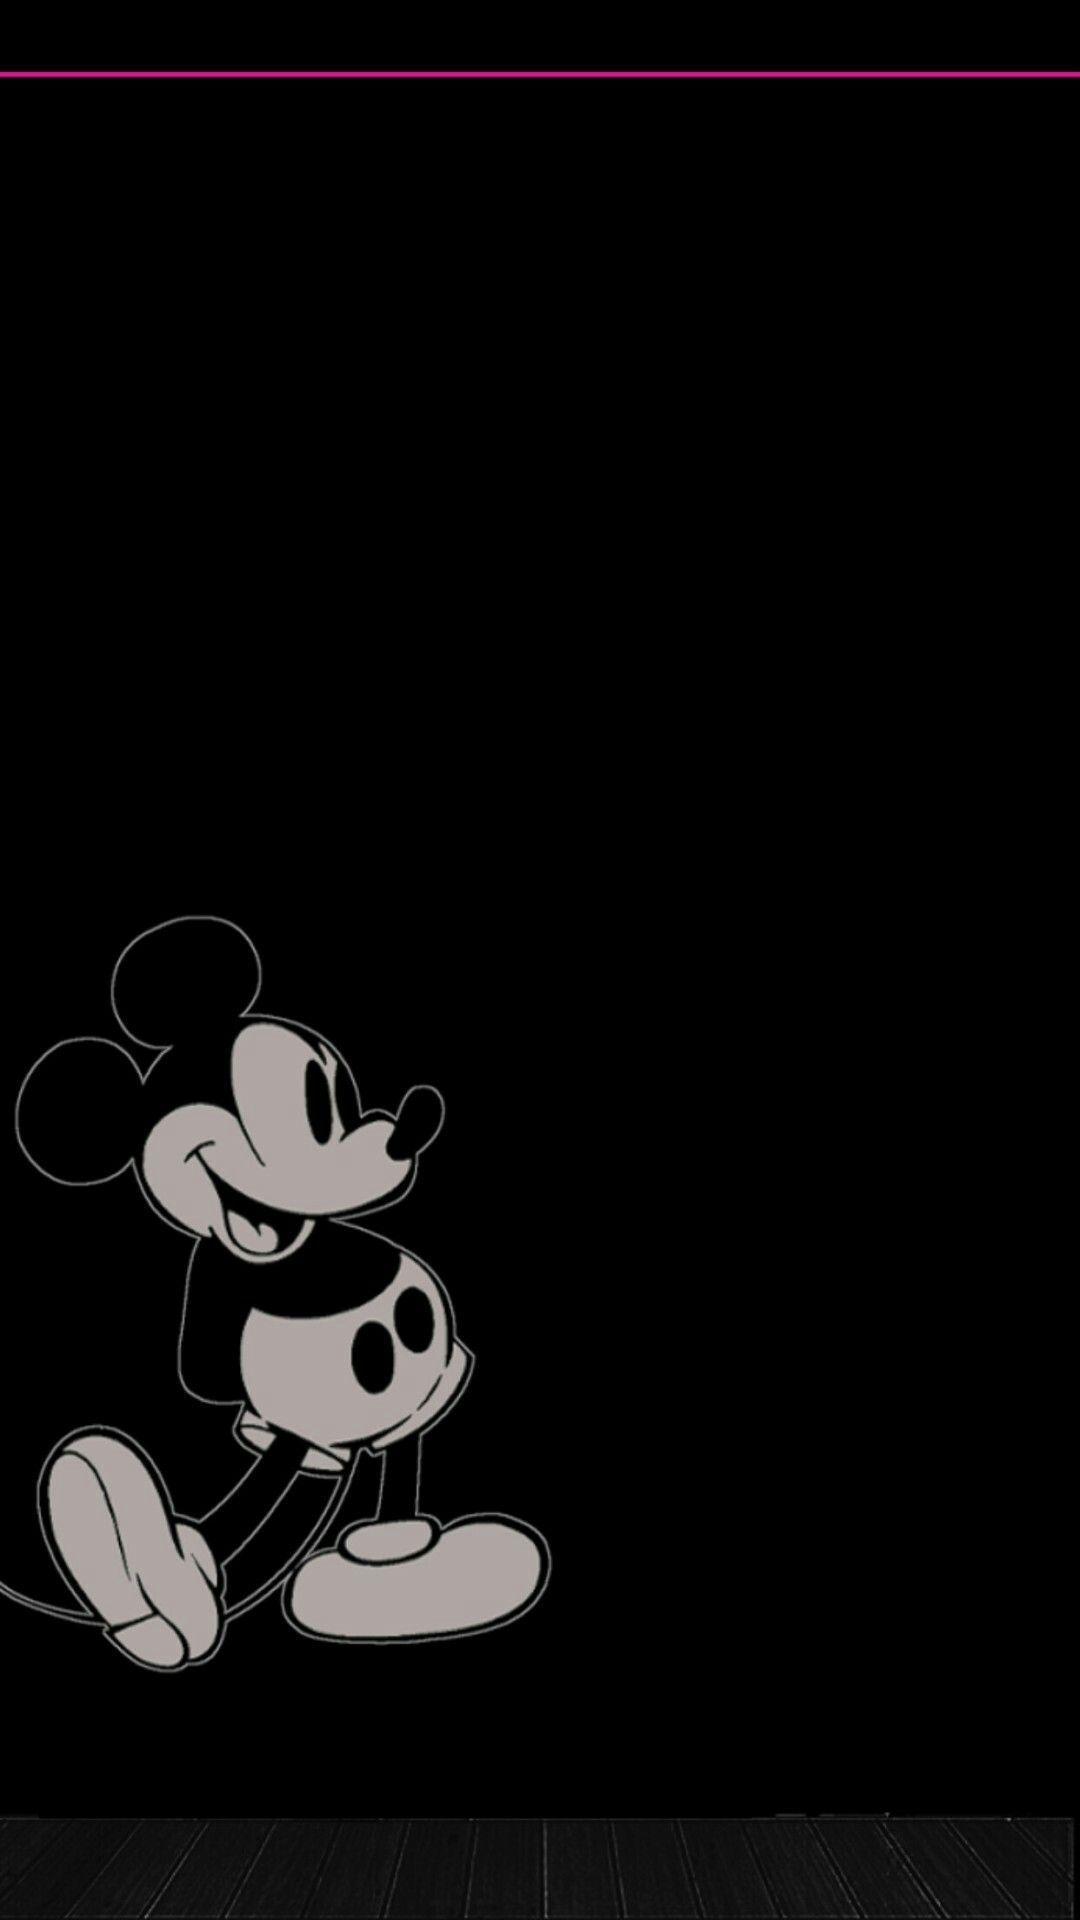 Black Minnie Mouse Wallpaper Ios. Mickey mouse wallpaper, Mickey mouse art, Mickey mouse background